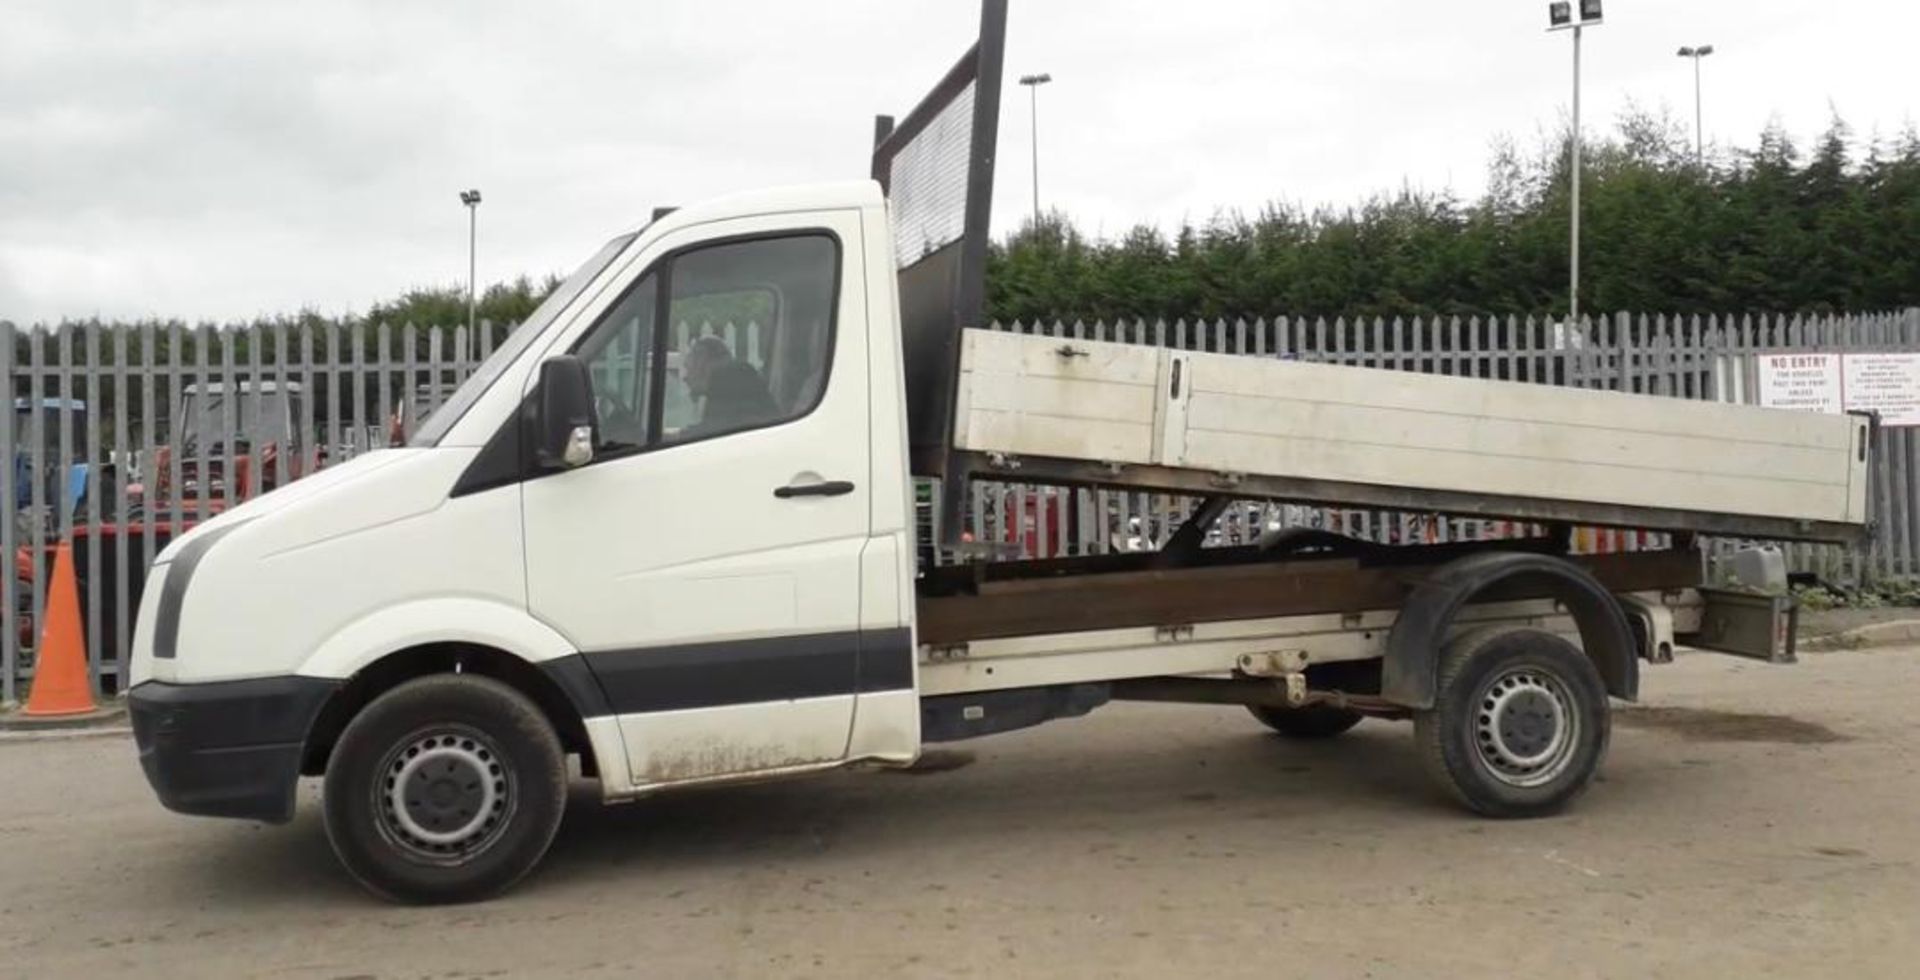 2009 VW CRAFTER CR35 TIPPER 109MWB.LOCATION NORTH YORKSHIRE.